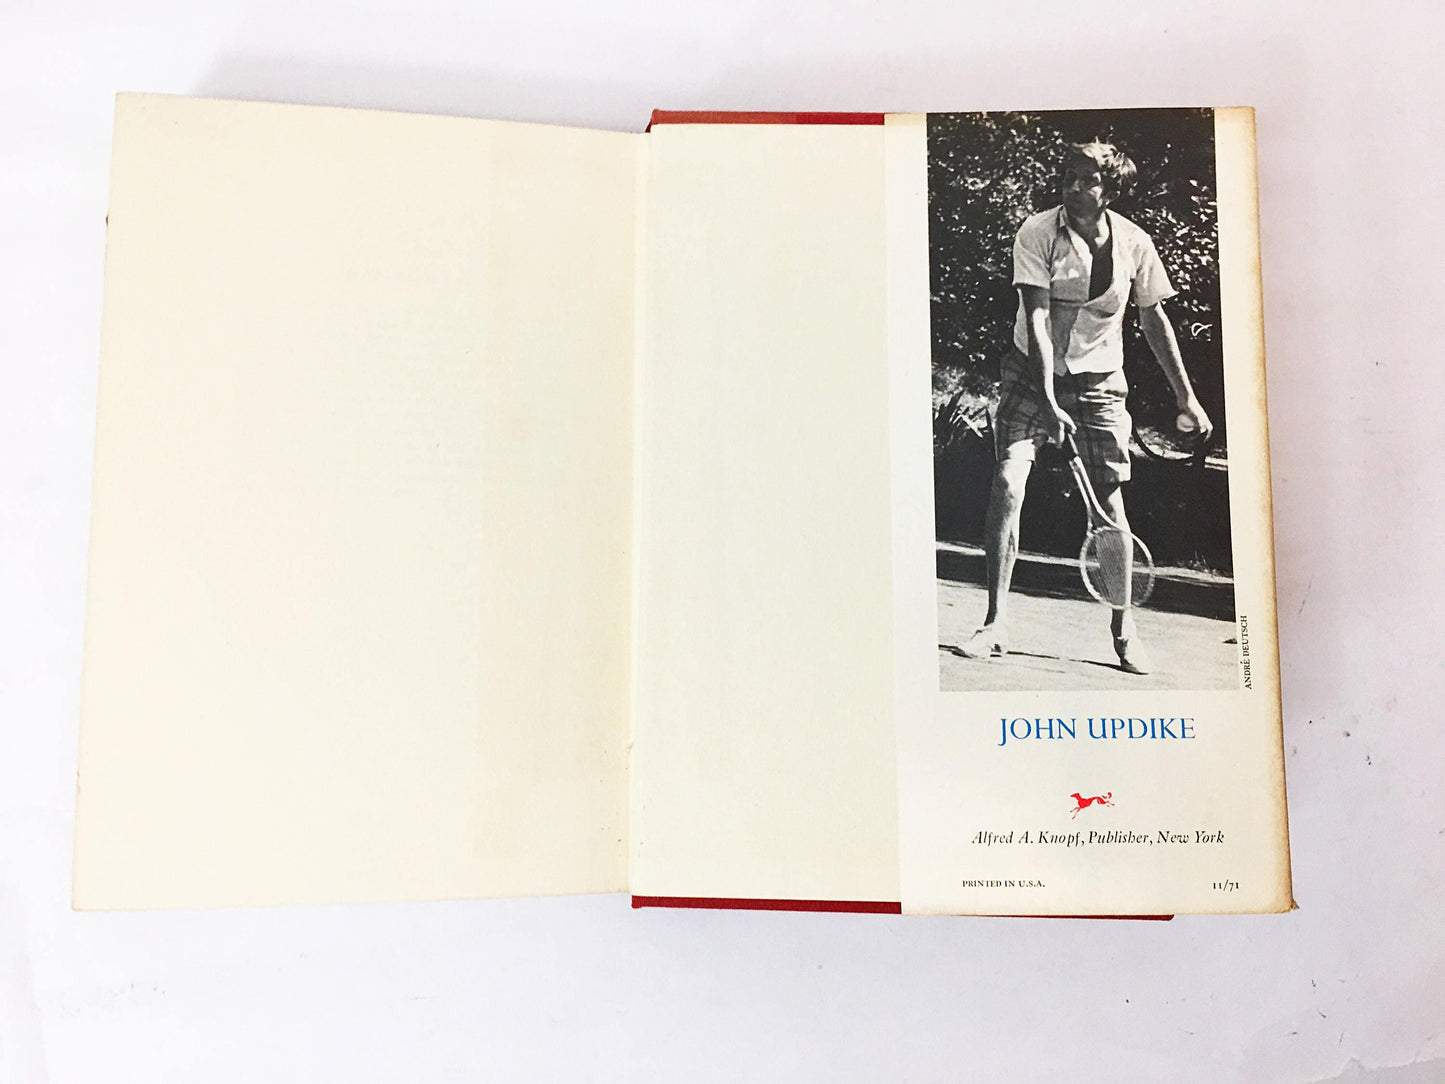 Rabbit Redux by John Updike. First Edition vintage book circa 1971. Spiritual quest of impulsive former athlete. Updike's Masterpiece. Gift